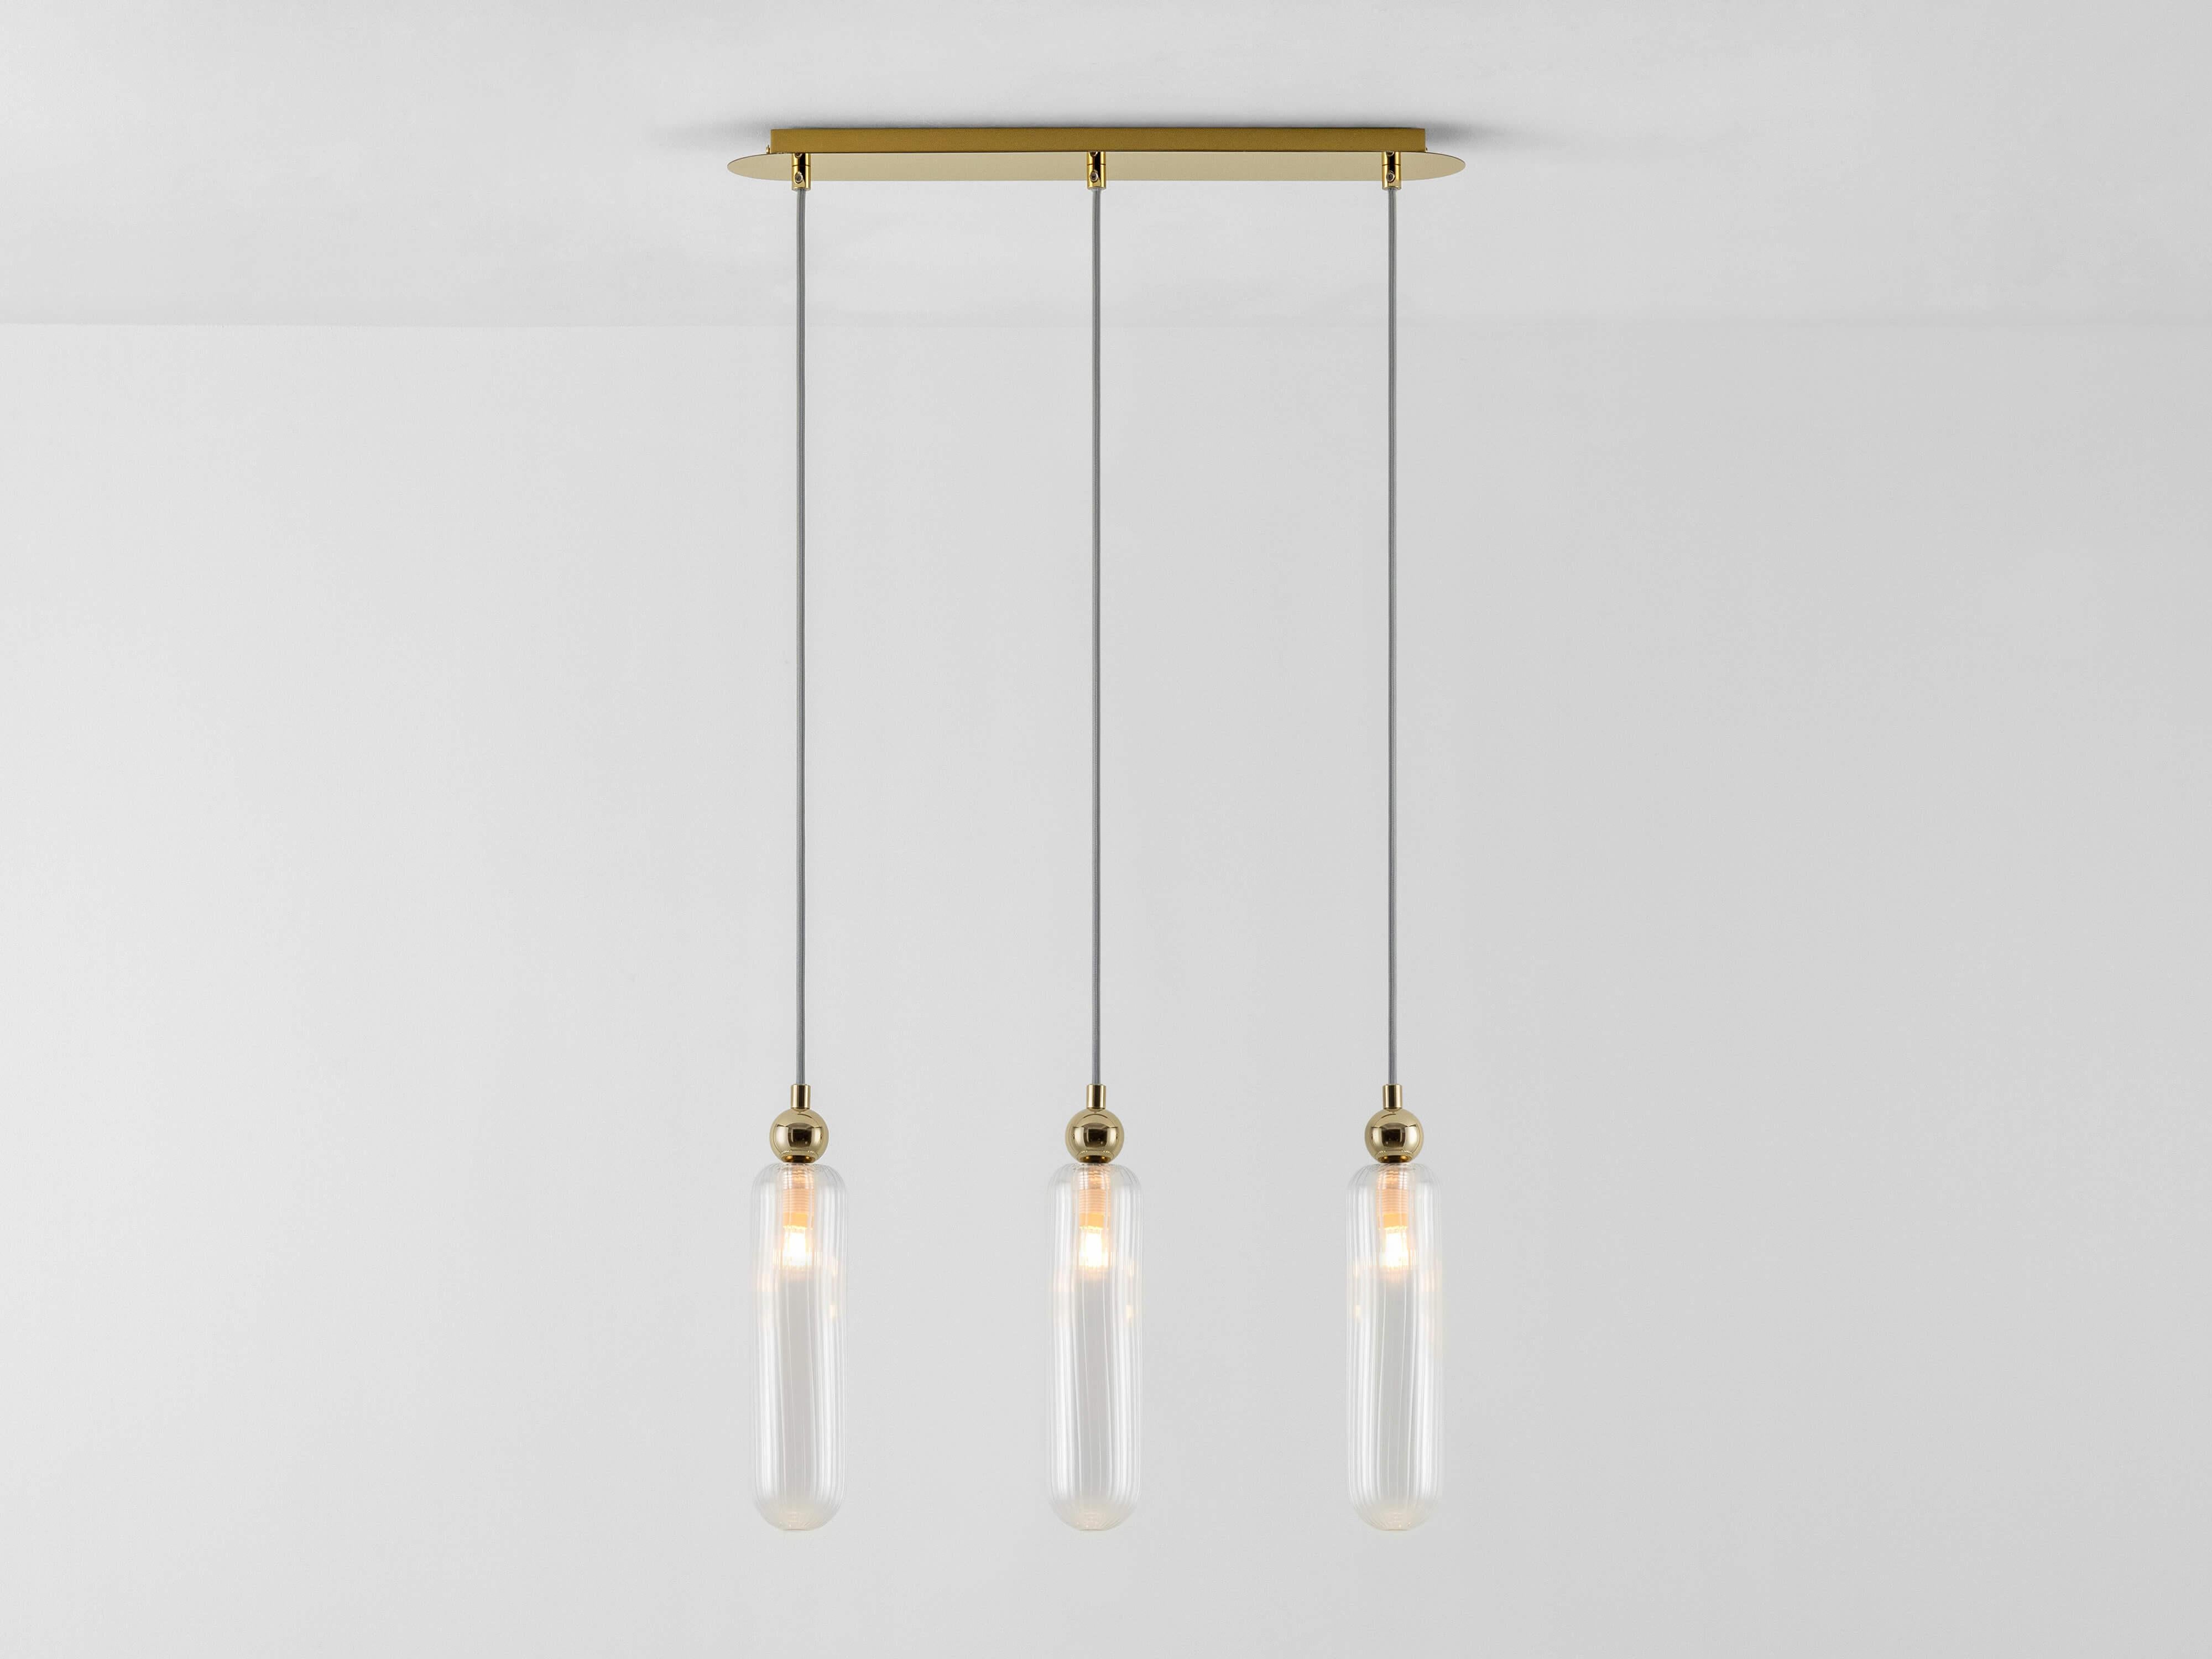 Simple, classic and elegant, this trio of pendants is a beautiful sculptural ceiling light, perfect for your dining, kitchen or living space. Hanging suspended on light grey fabric wires, the ribbed glass shades are complemented by the metalic brass